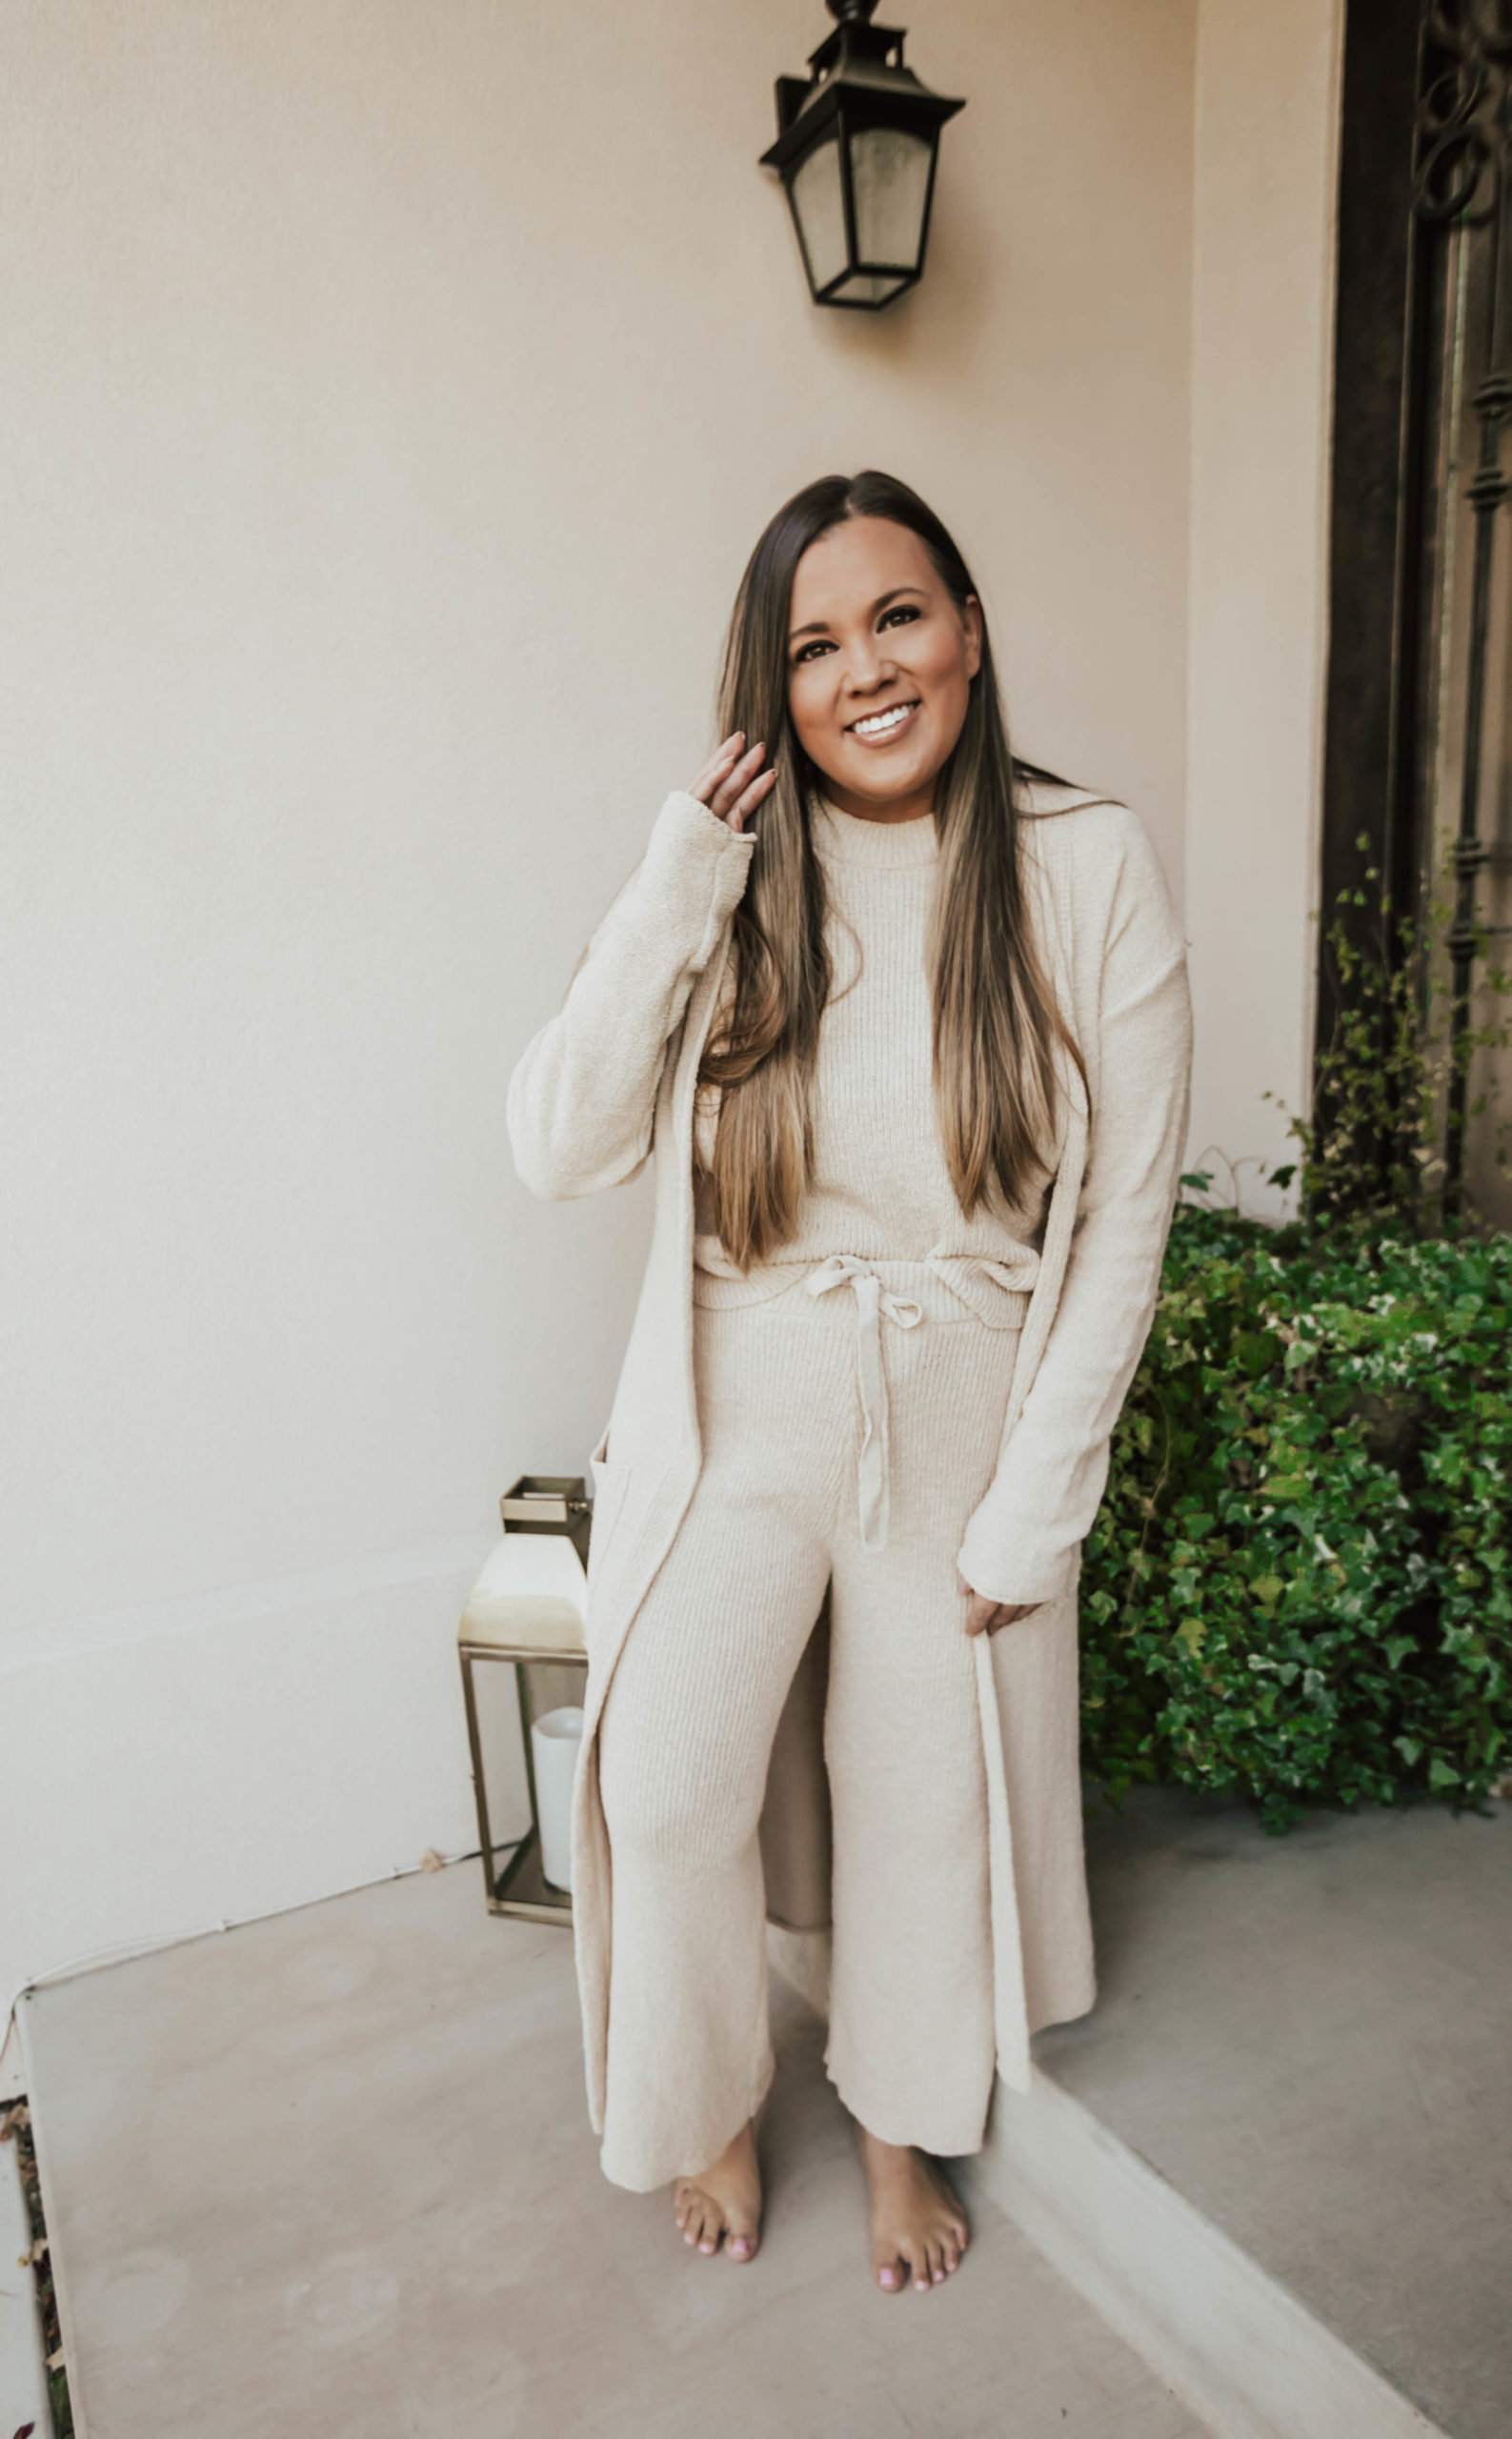 Reno blogger, Ashley Zeal Hurd, from The Ashley & Emiily blog shares ten random things she's loving lately. She's covering fashion, beauty & more!